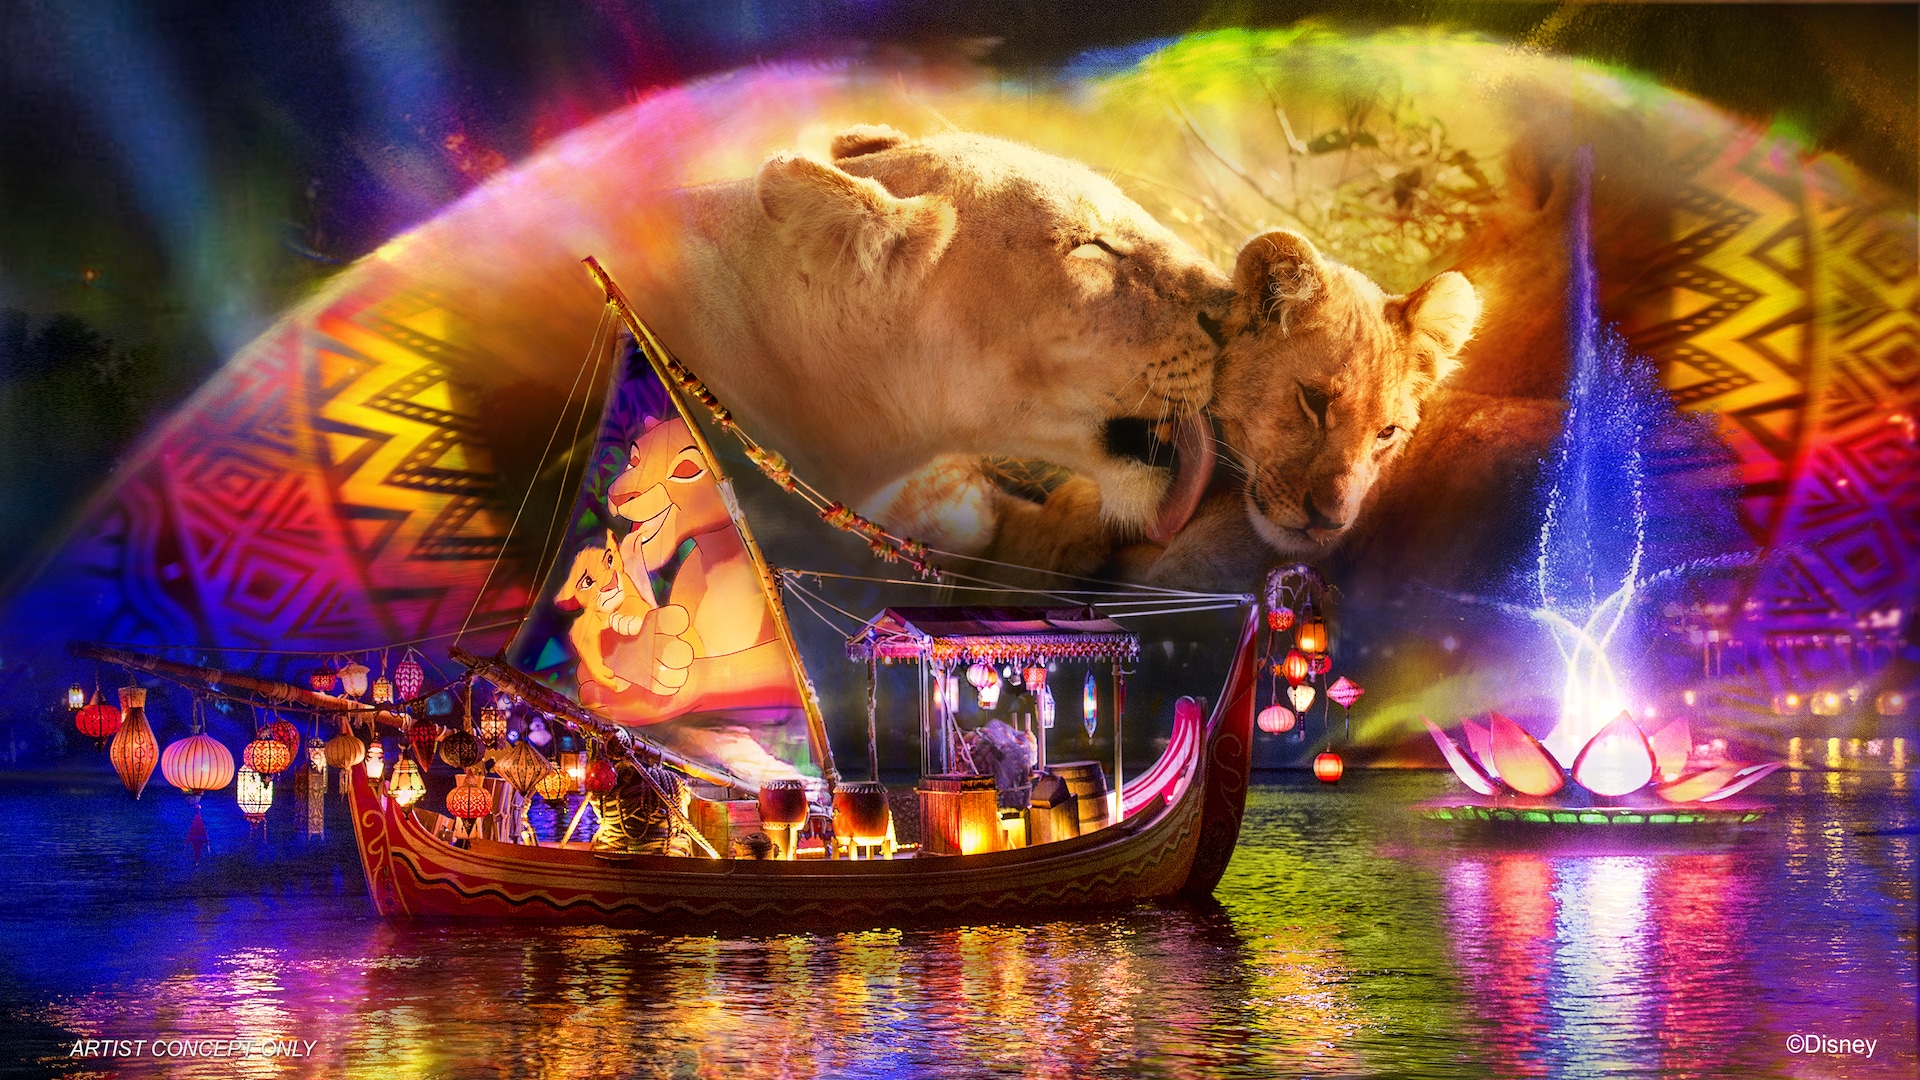 A boat adorned with lanterns sails across the water under a projection of a lioness and her cub